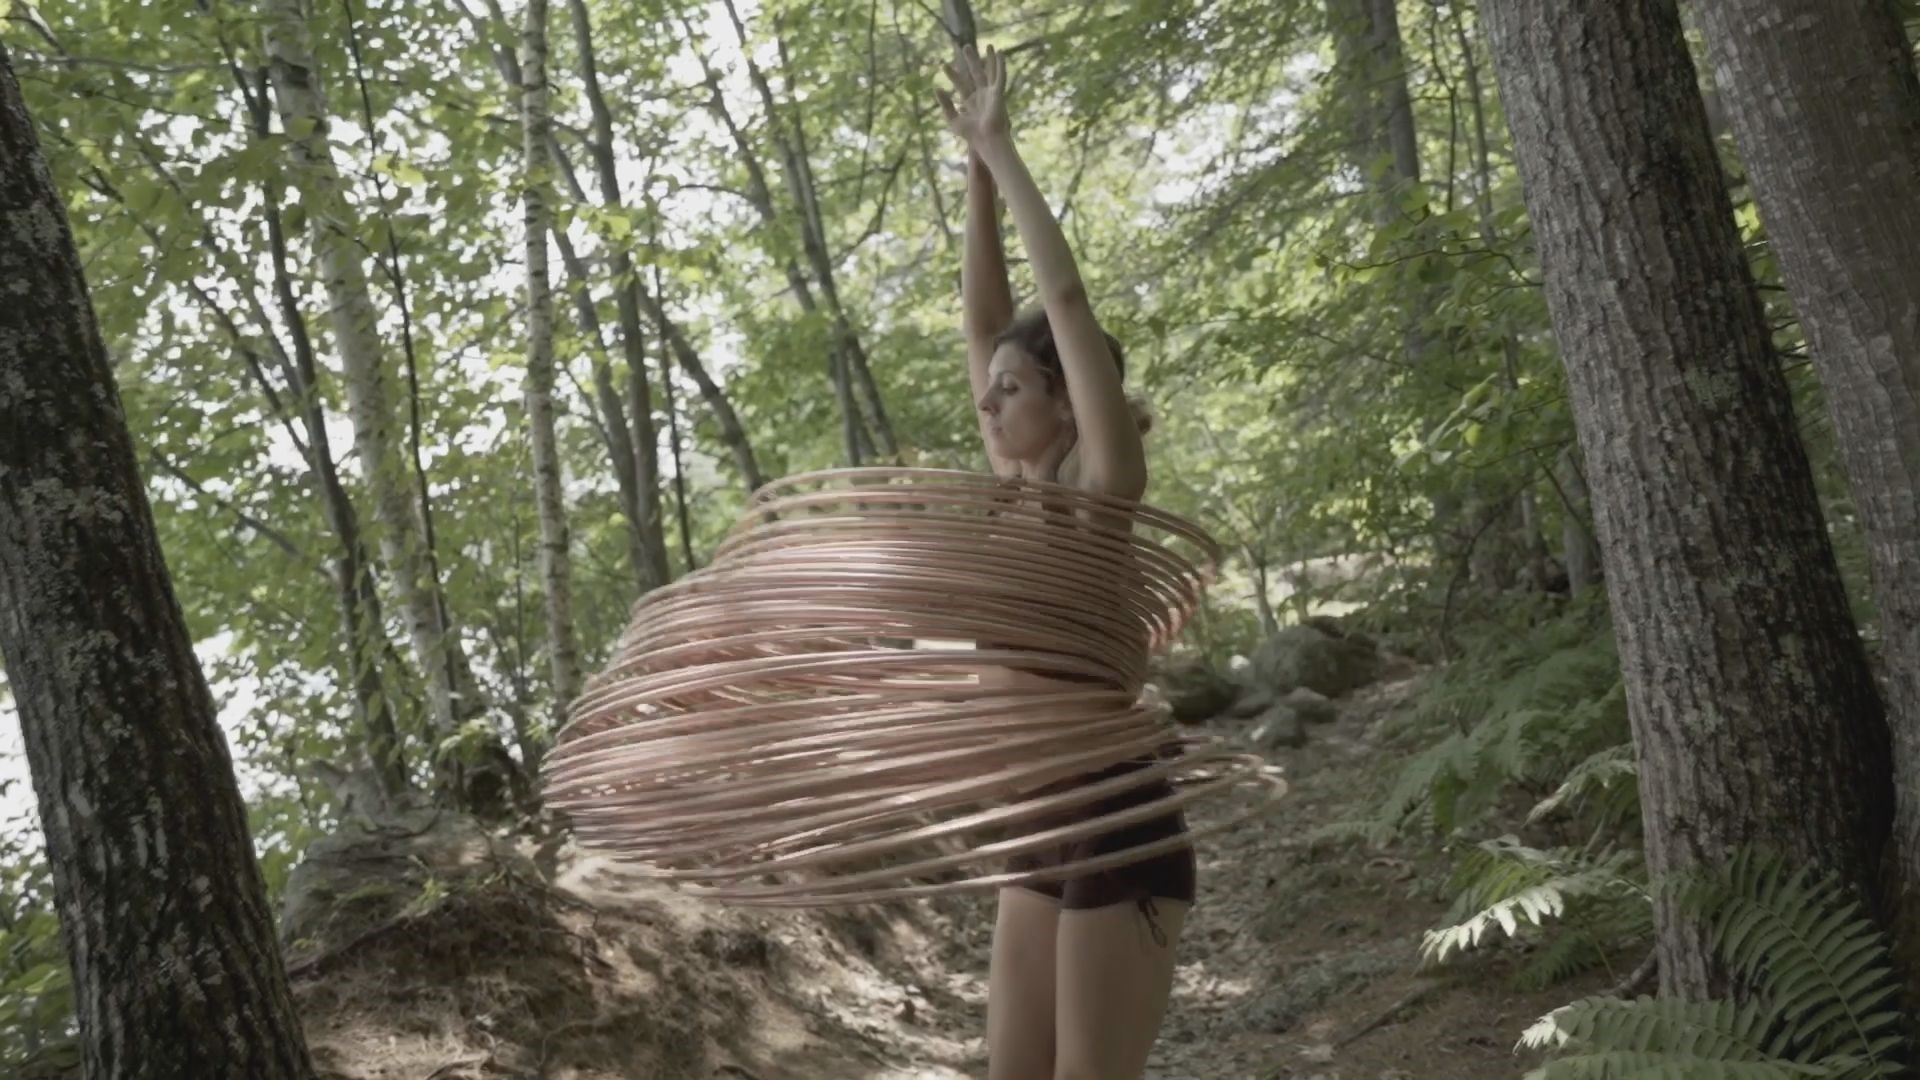 Dance teacher Nettie Gentempo has taken hula hooping to new heights. She's hula hooping every day for a year, sharing it online and hoping it will inspire others.